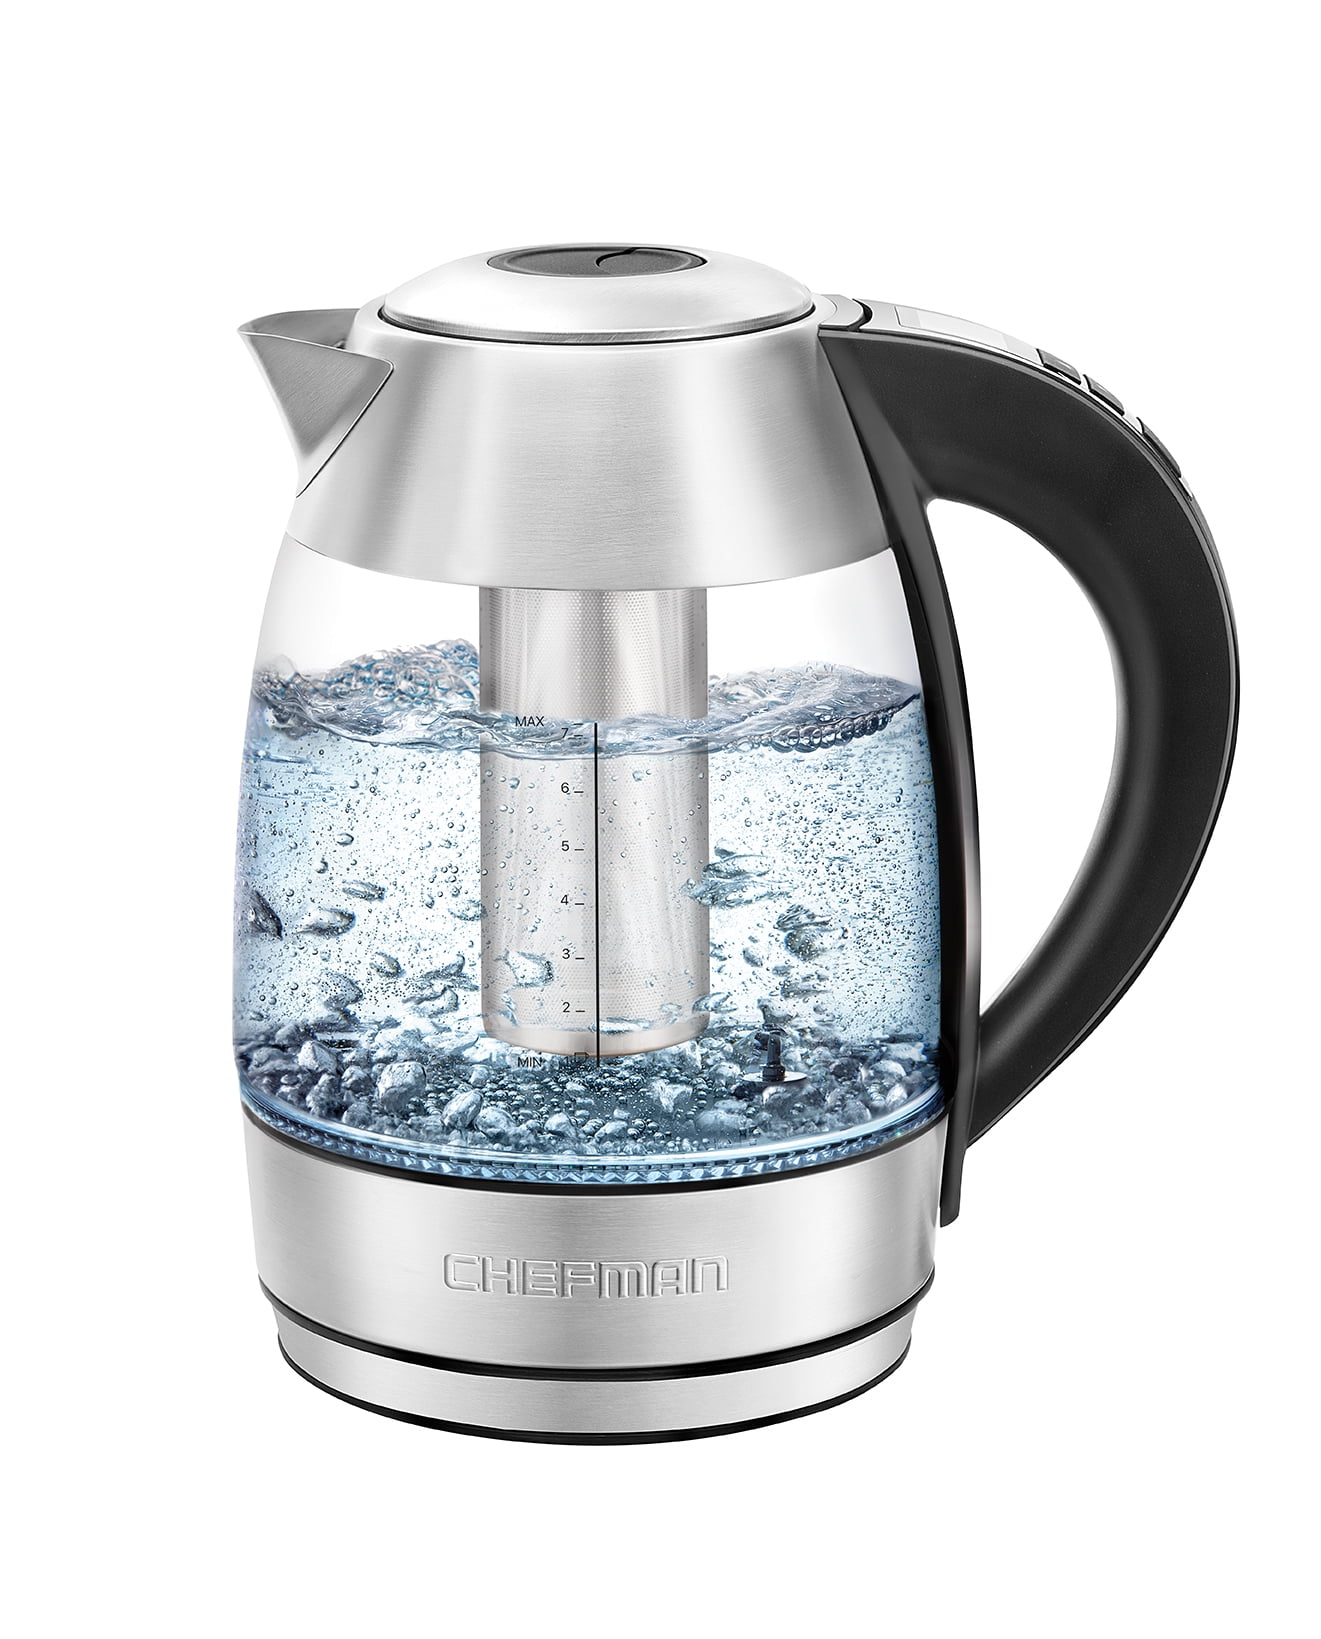 Electric Glass Kettle - 1.8 L High Capacity (Detachable)